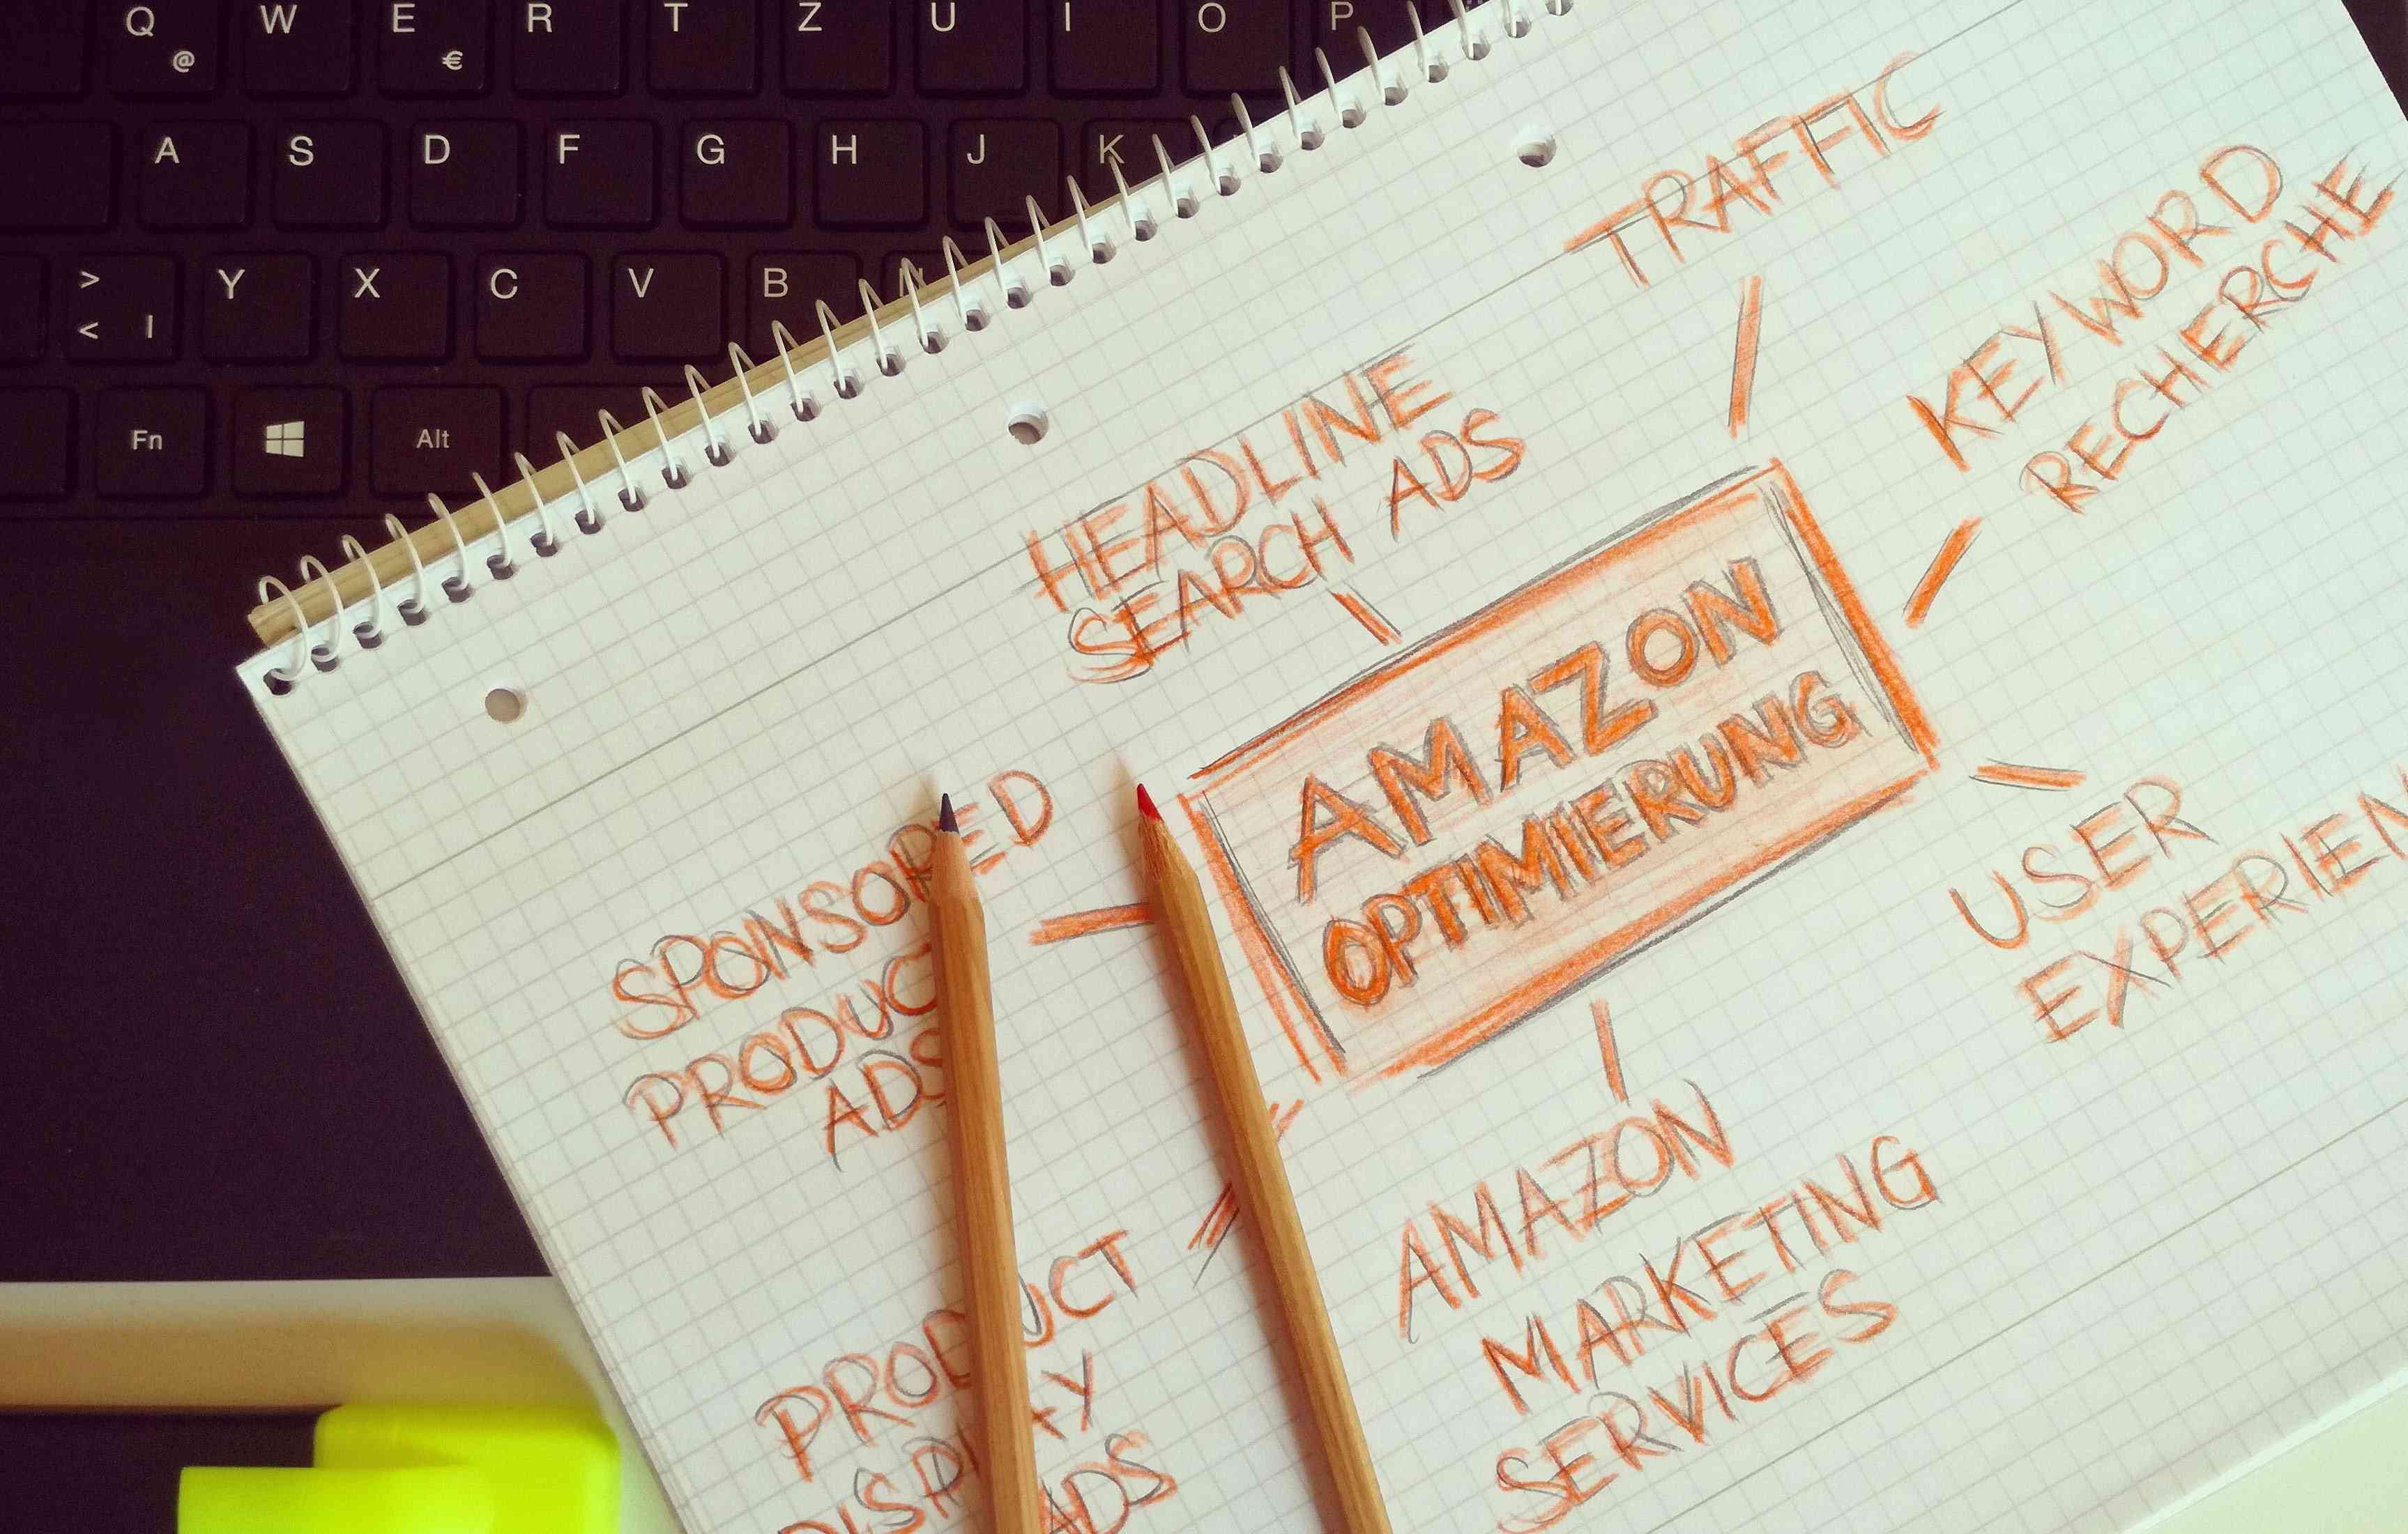 Amazon Advertising: Strategies to Increase Visibility and Drive Sales